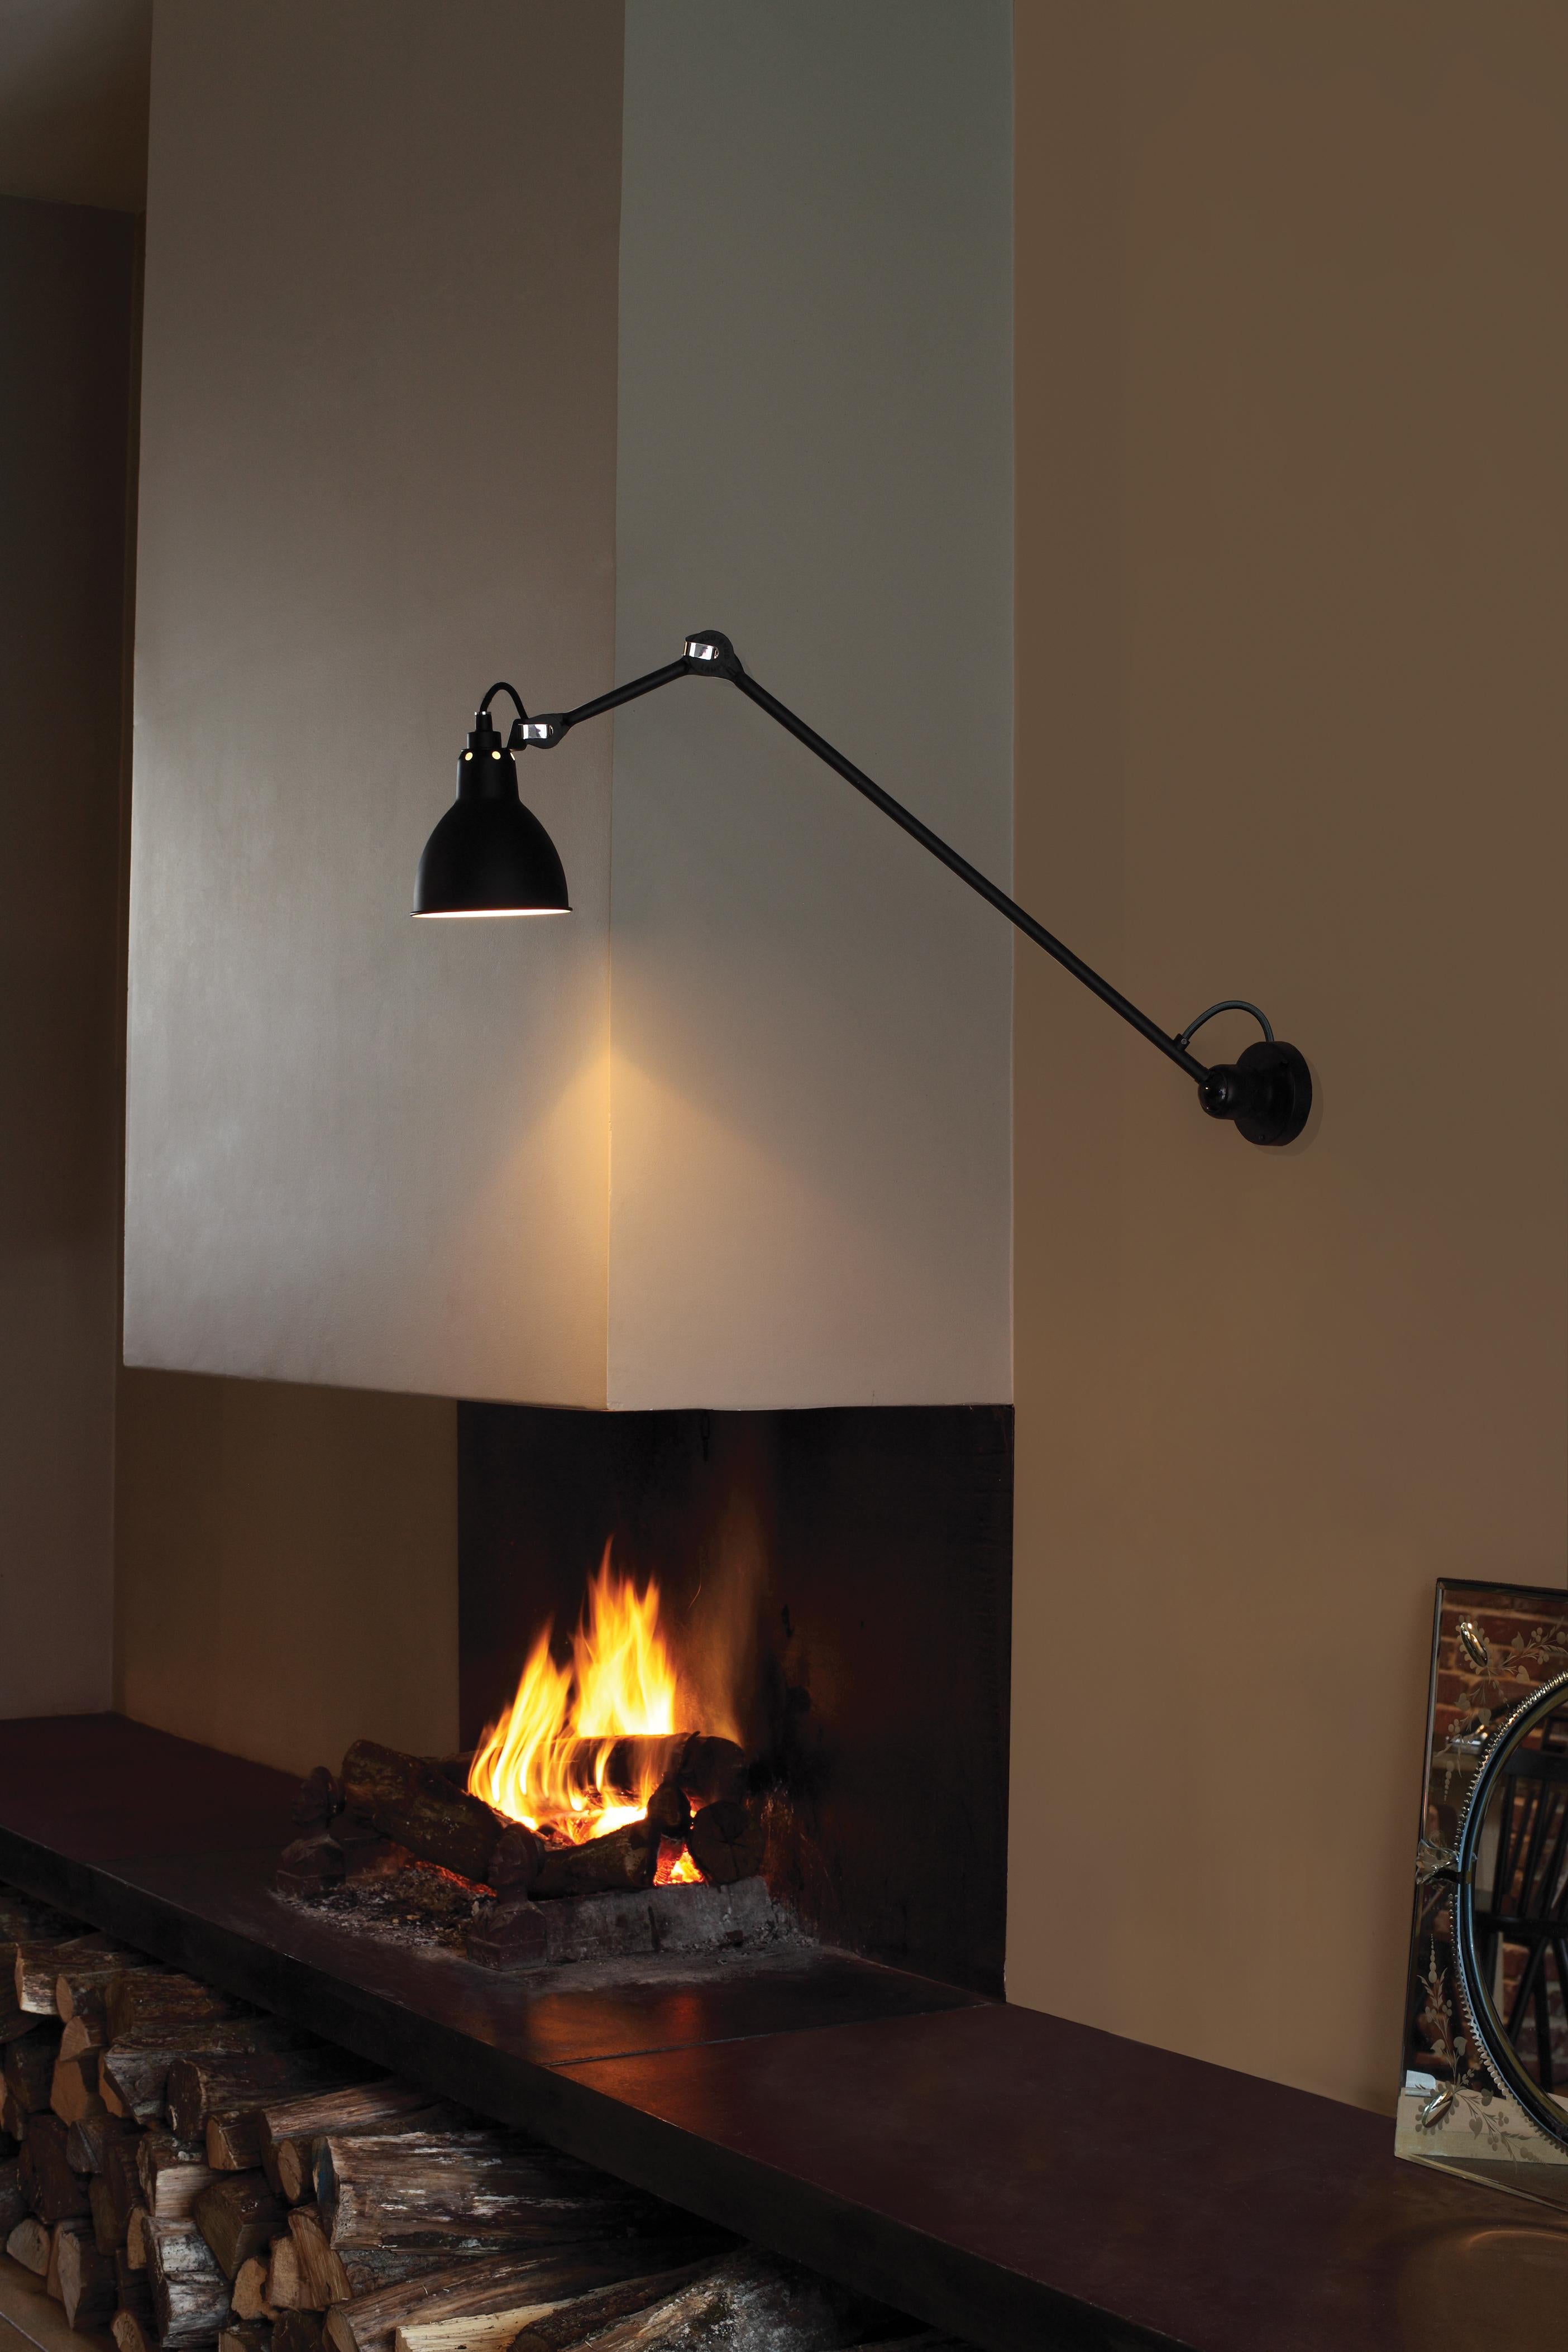 DCW Editions La Lampe Gras N°304 L60 Wall Lamp in Black Steel Arm and Copper Shade by Bernard-Albin Gras
 
 In 1921 Bernard-Albin GRAS designed a series of lamps for use in offices and in industrial environments. The GRAS lamp, as it was